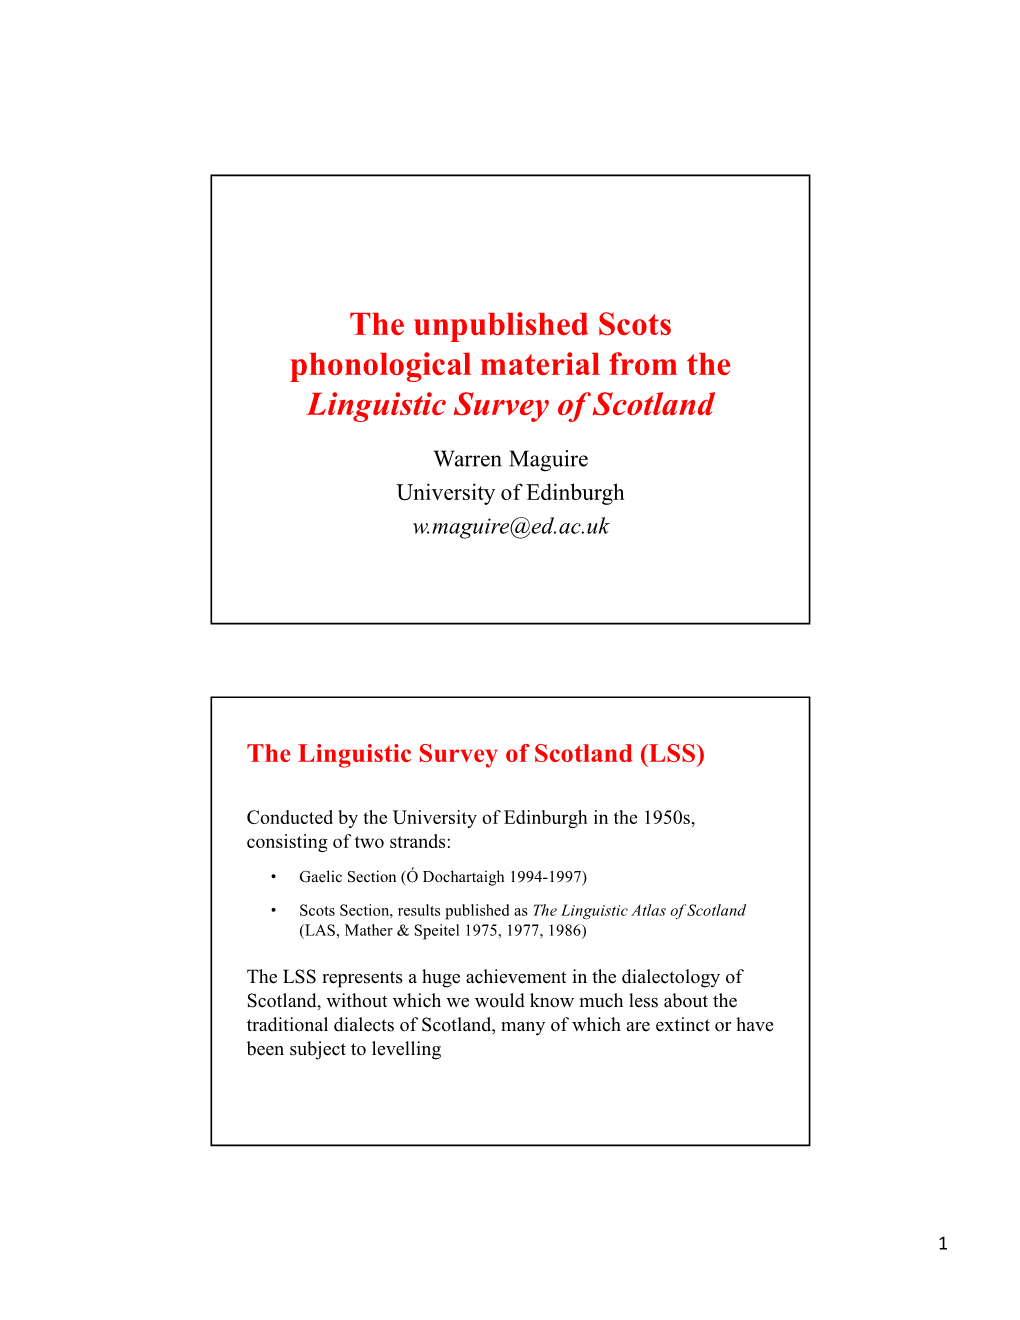 The Unpublished Scots Phonological Material from the Linguistic Survey of Scotland